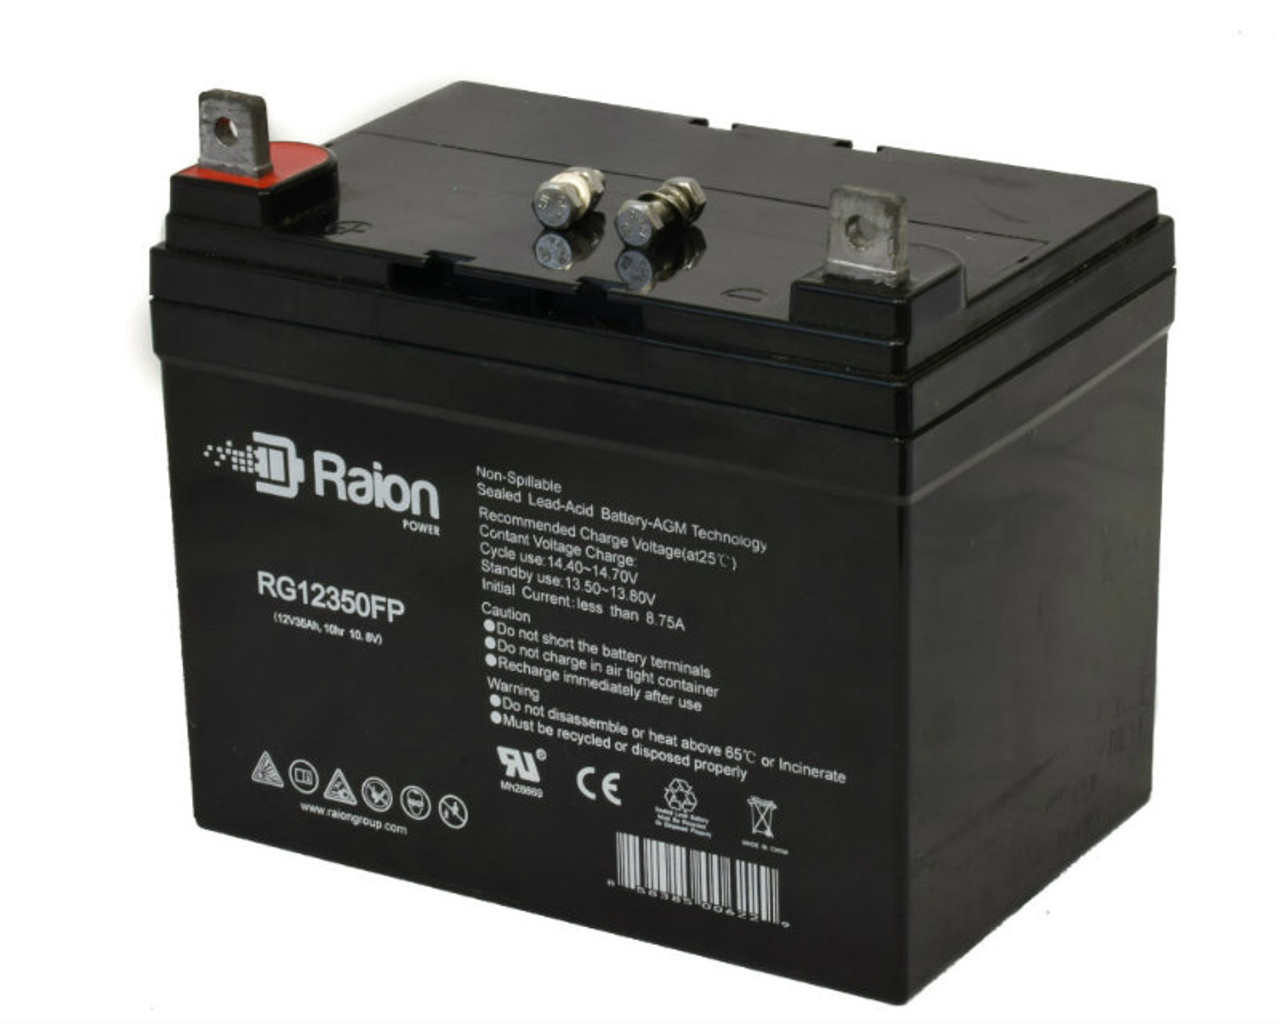 Raion Power Replacement 12V 35Ah RG12350FP Battery for CSB GH12340